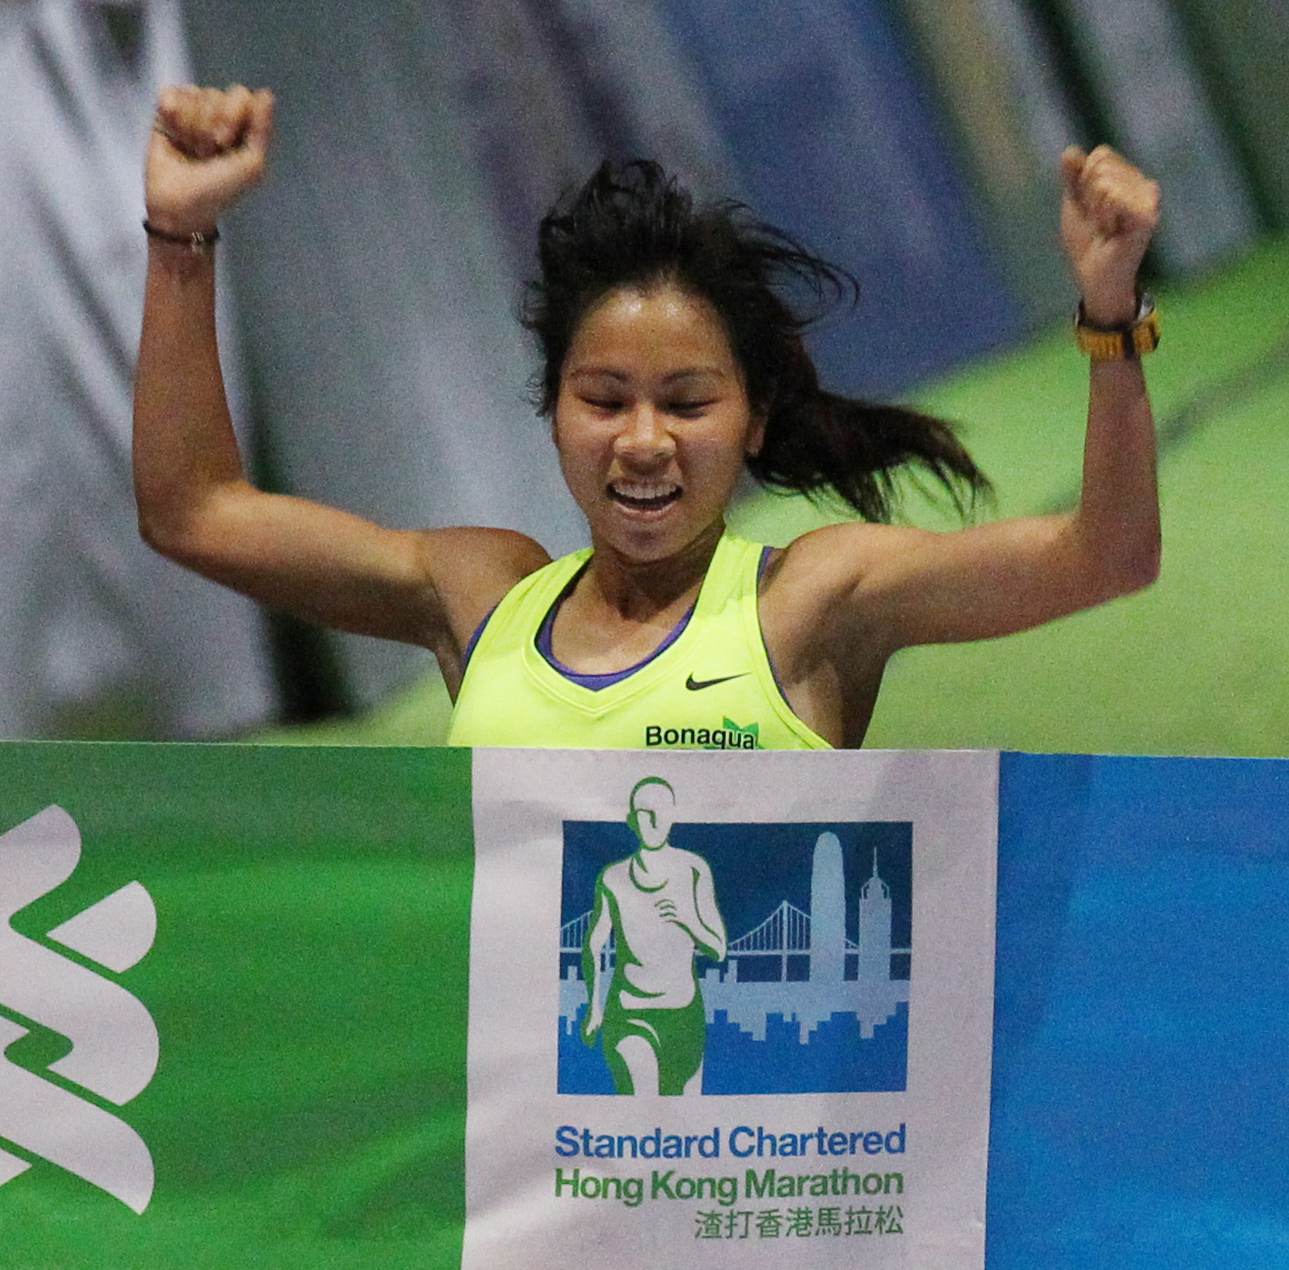 Christy Yiu has stepped up to longer distances, including the marathon, since dominating 10km races. Photo: Nora Tam